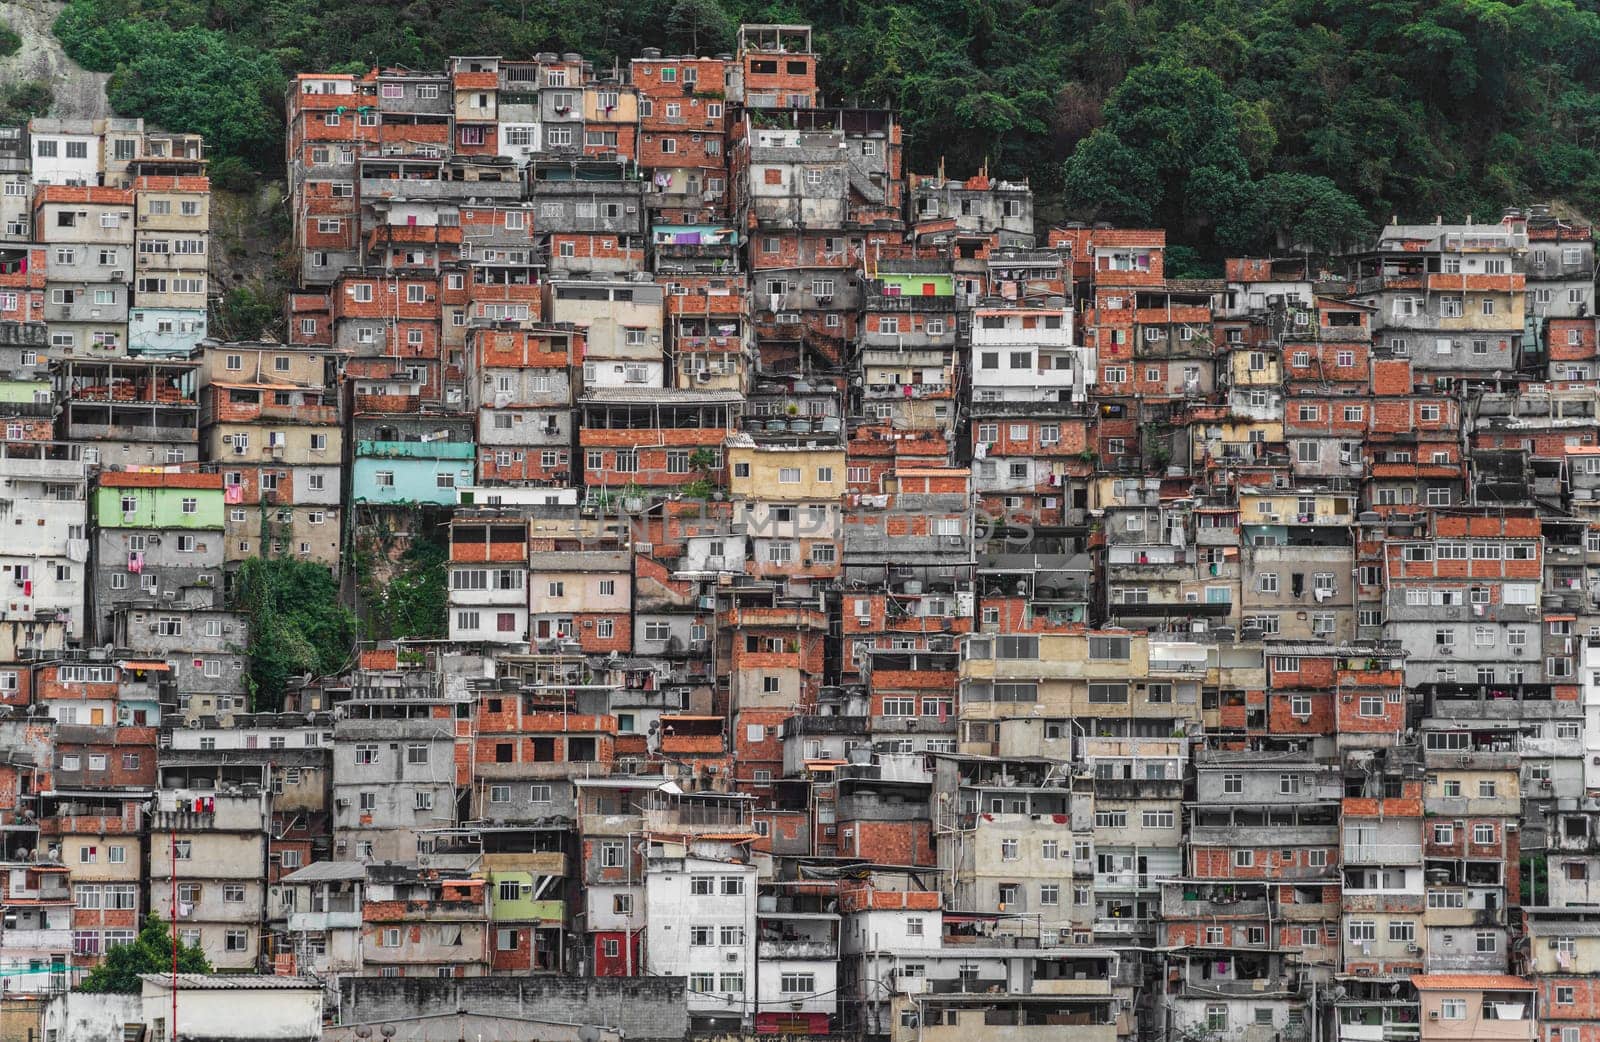 A bustling favela descends sharply into the jungle, displaying a chaotic array of homes.